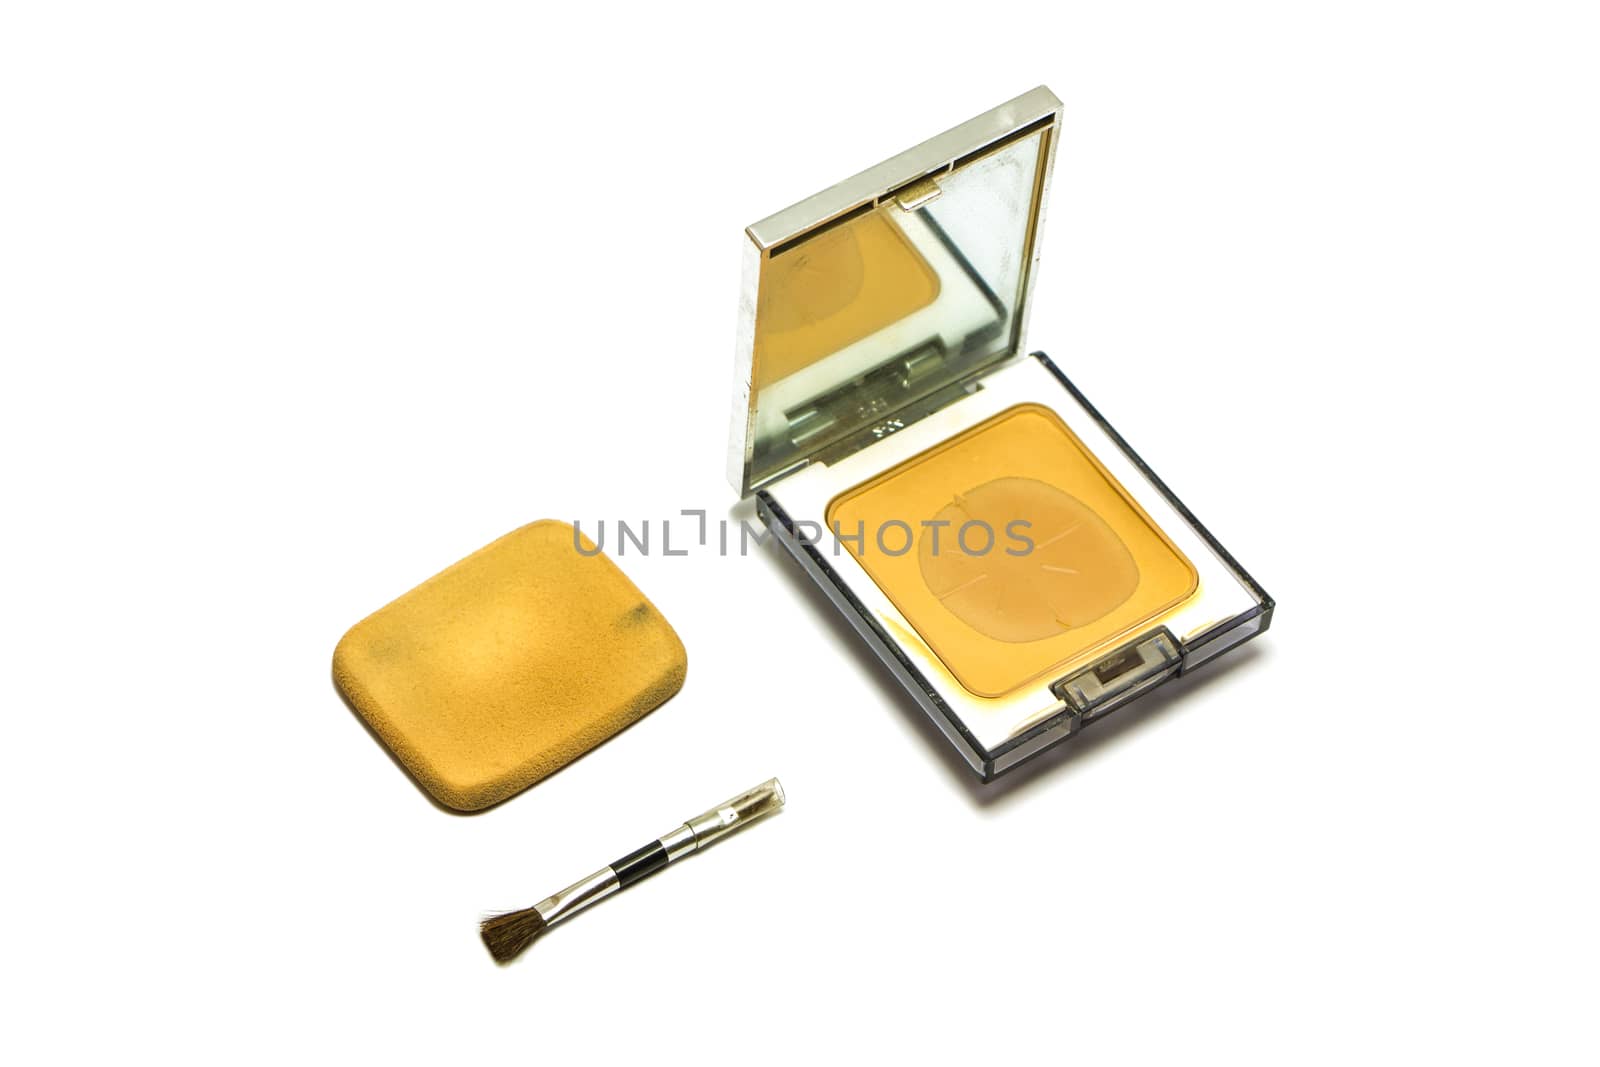 Cosmetic Powder Compact and small brushes